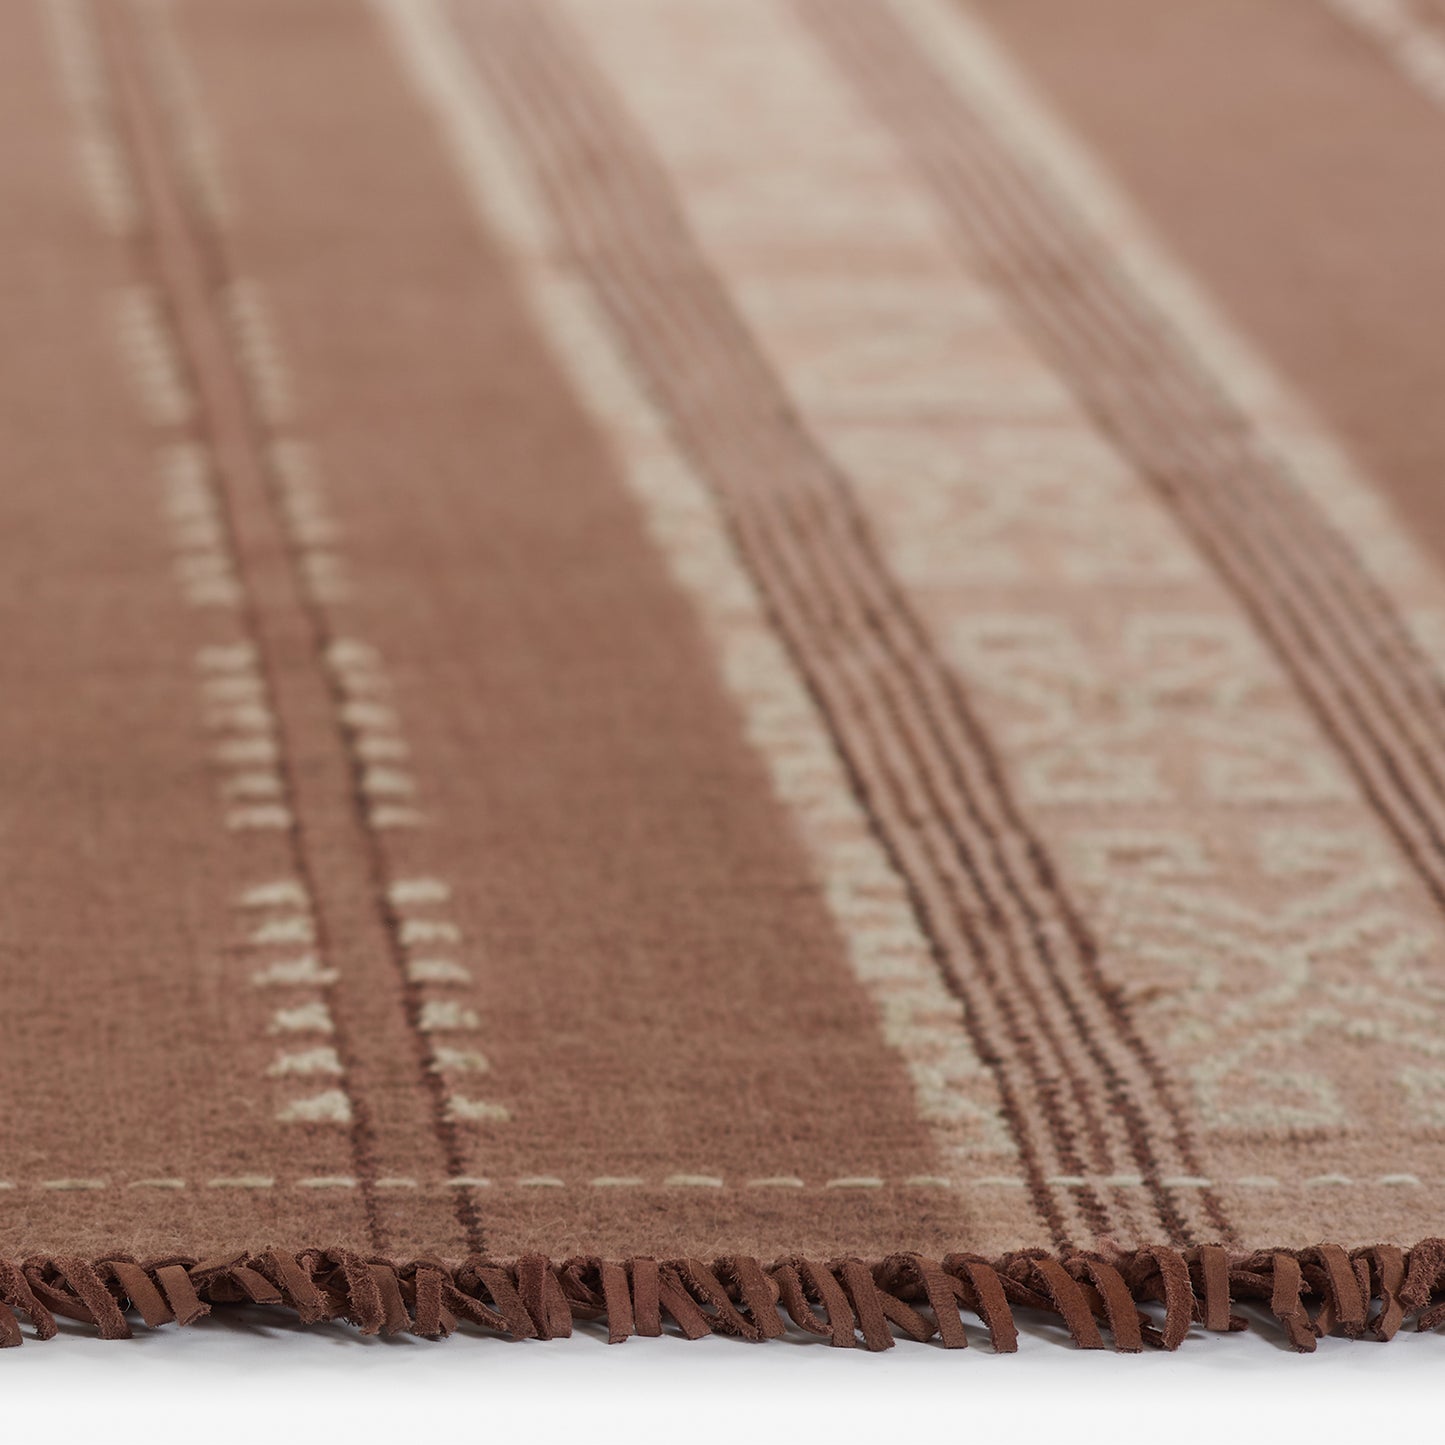 Cluny Voltaire Rug- Brown